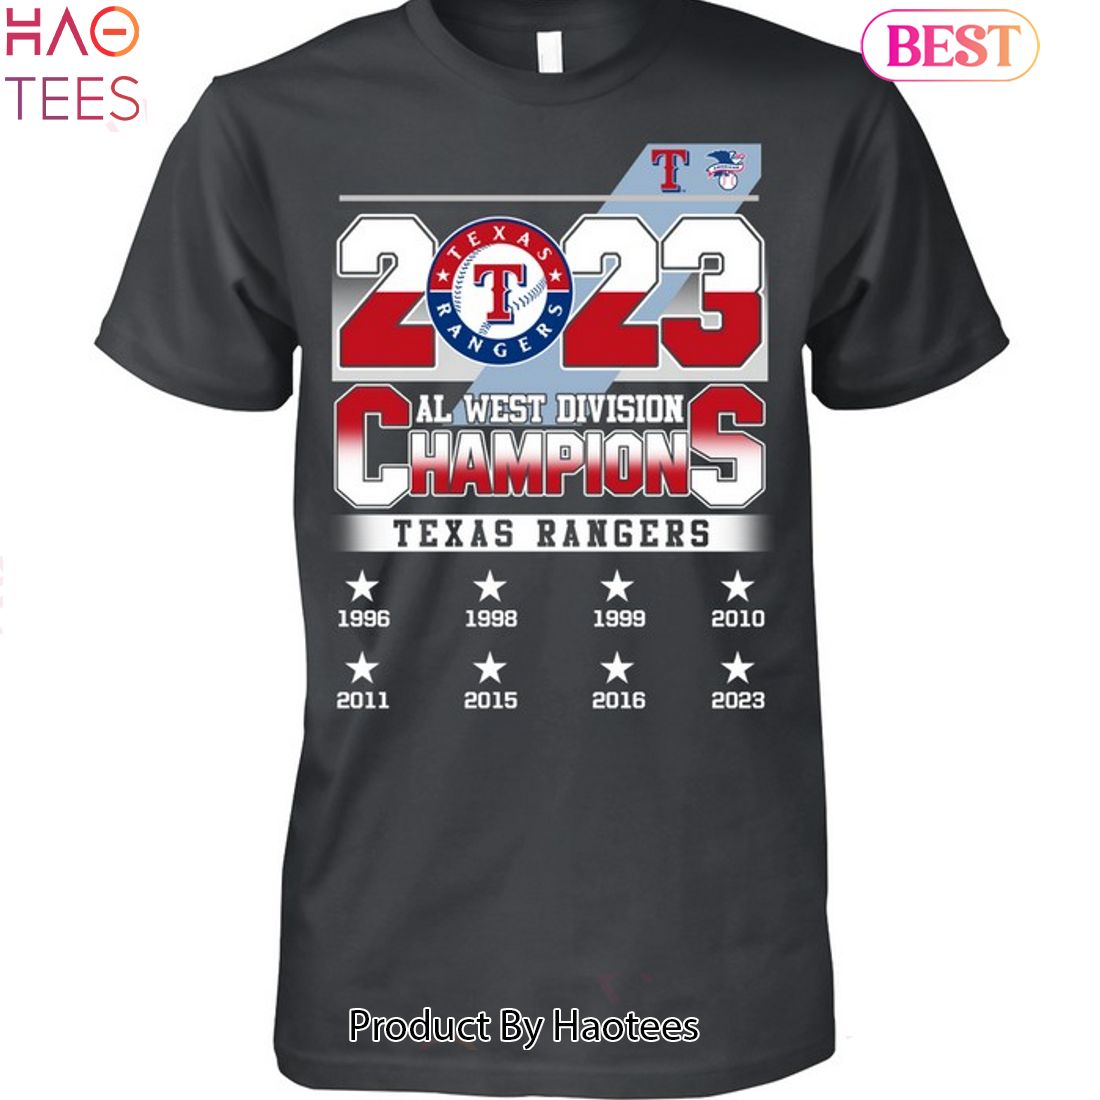 1999 Texas Rangers Western Division Champs T-shirt Size XL